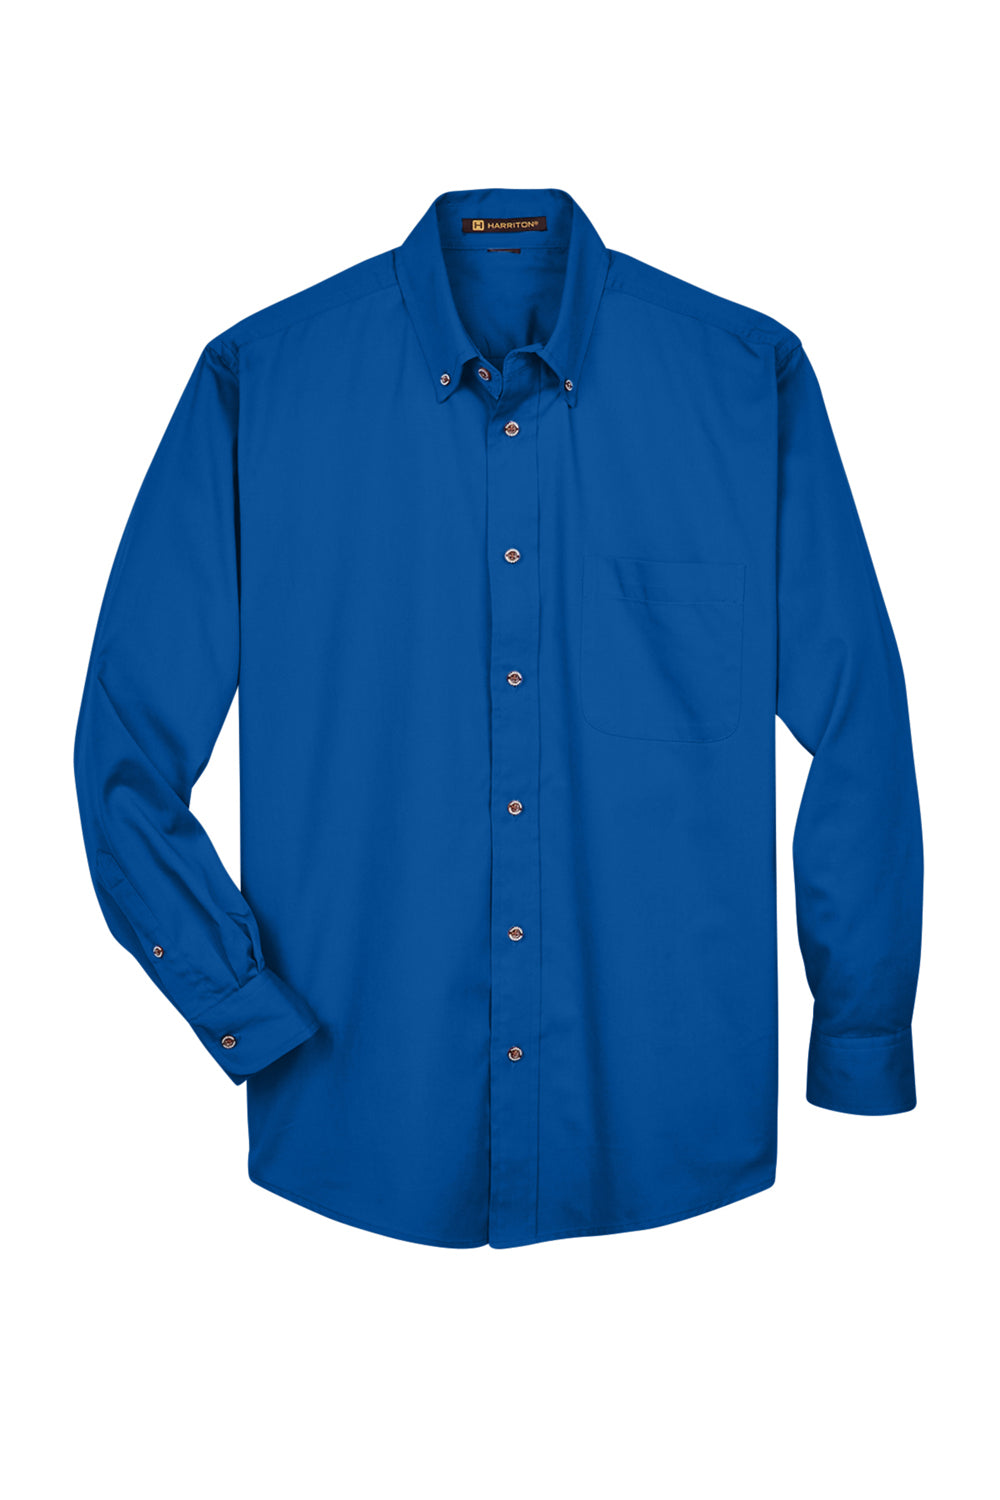 Harriton M500/M500T Wrinkle Resistant Long Sleeve Button Down Shirt w/ Pocket French Blue Flat Front